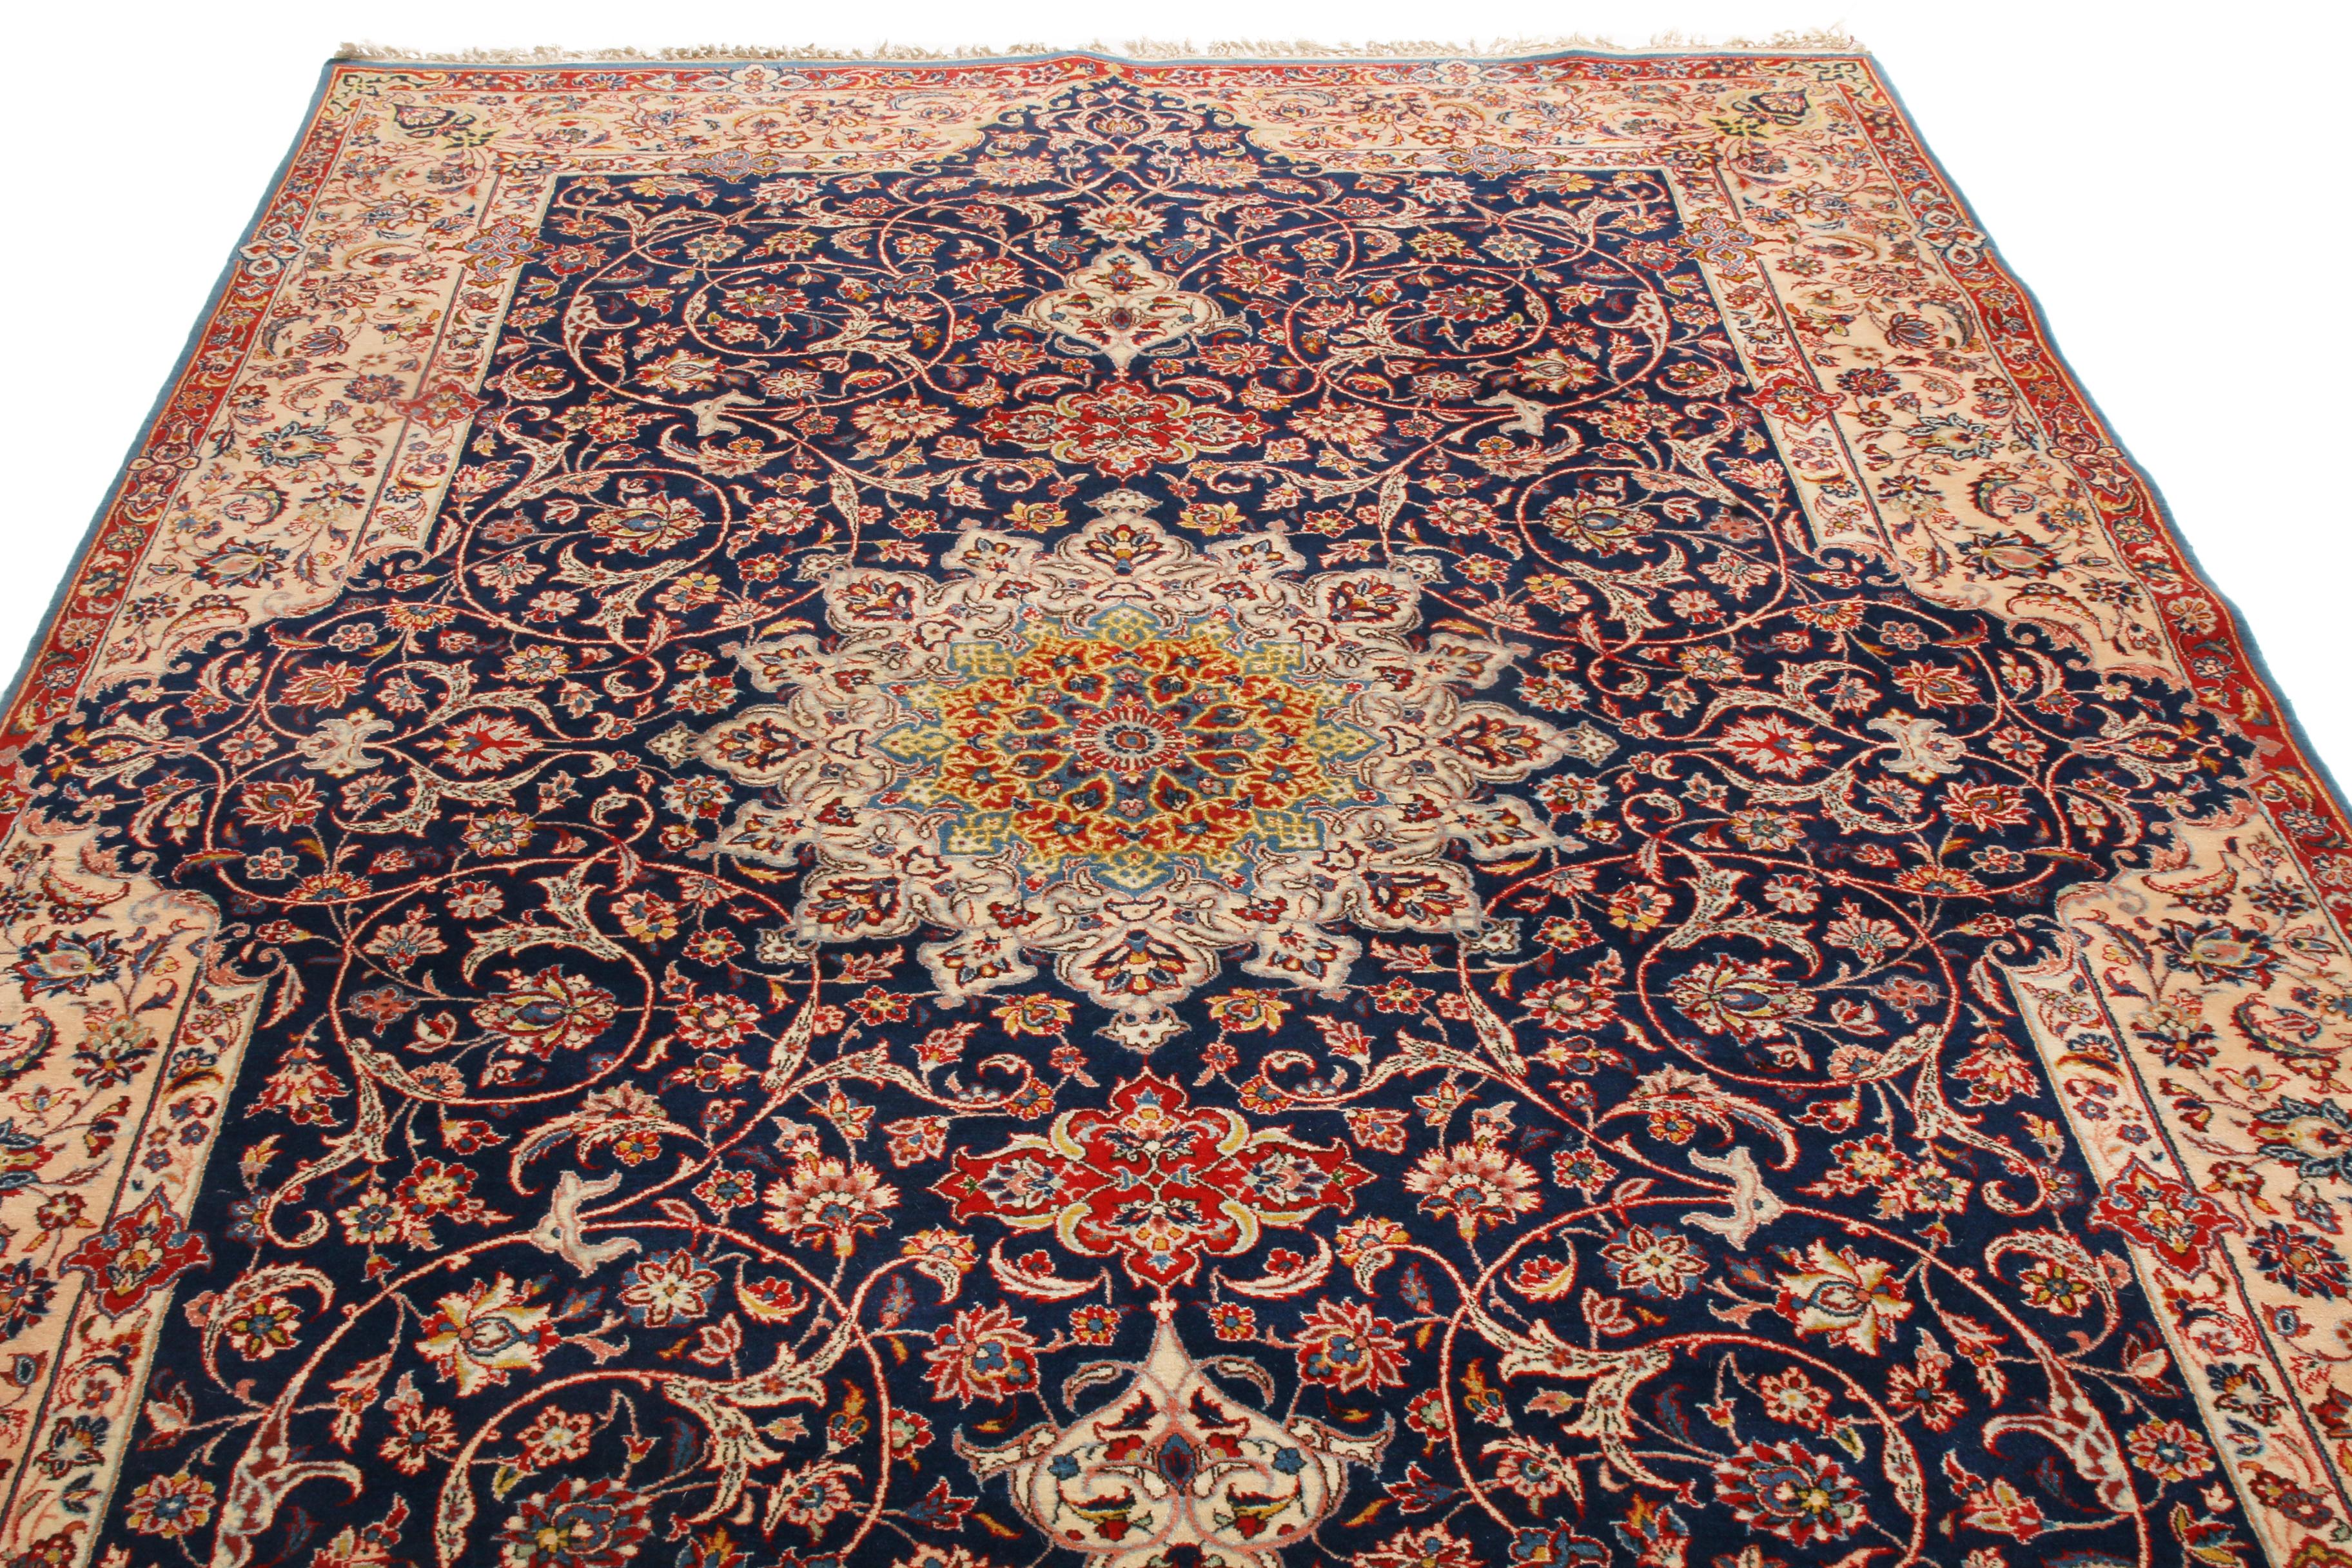 Originating from Persia in 1940, this vintage traditional Isfahan rug employs one of the most finely woven variations of the Islamic pattern enfolding its medallion field design. Hand knotted in fine, high-quality wool, the Islamic pattern is seen